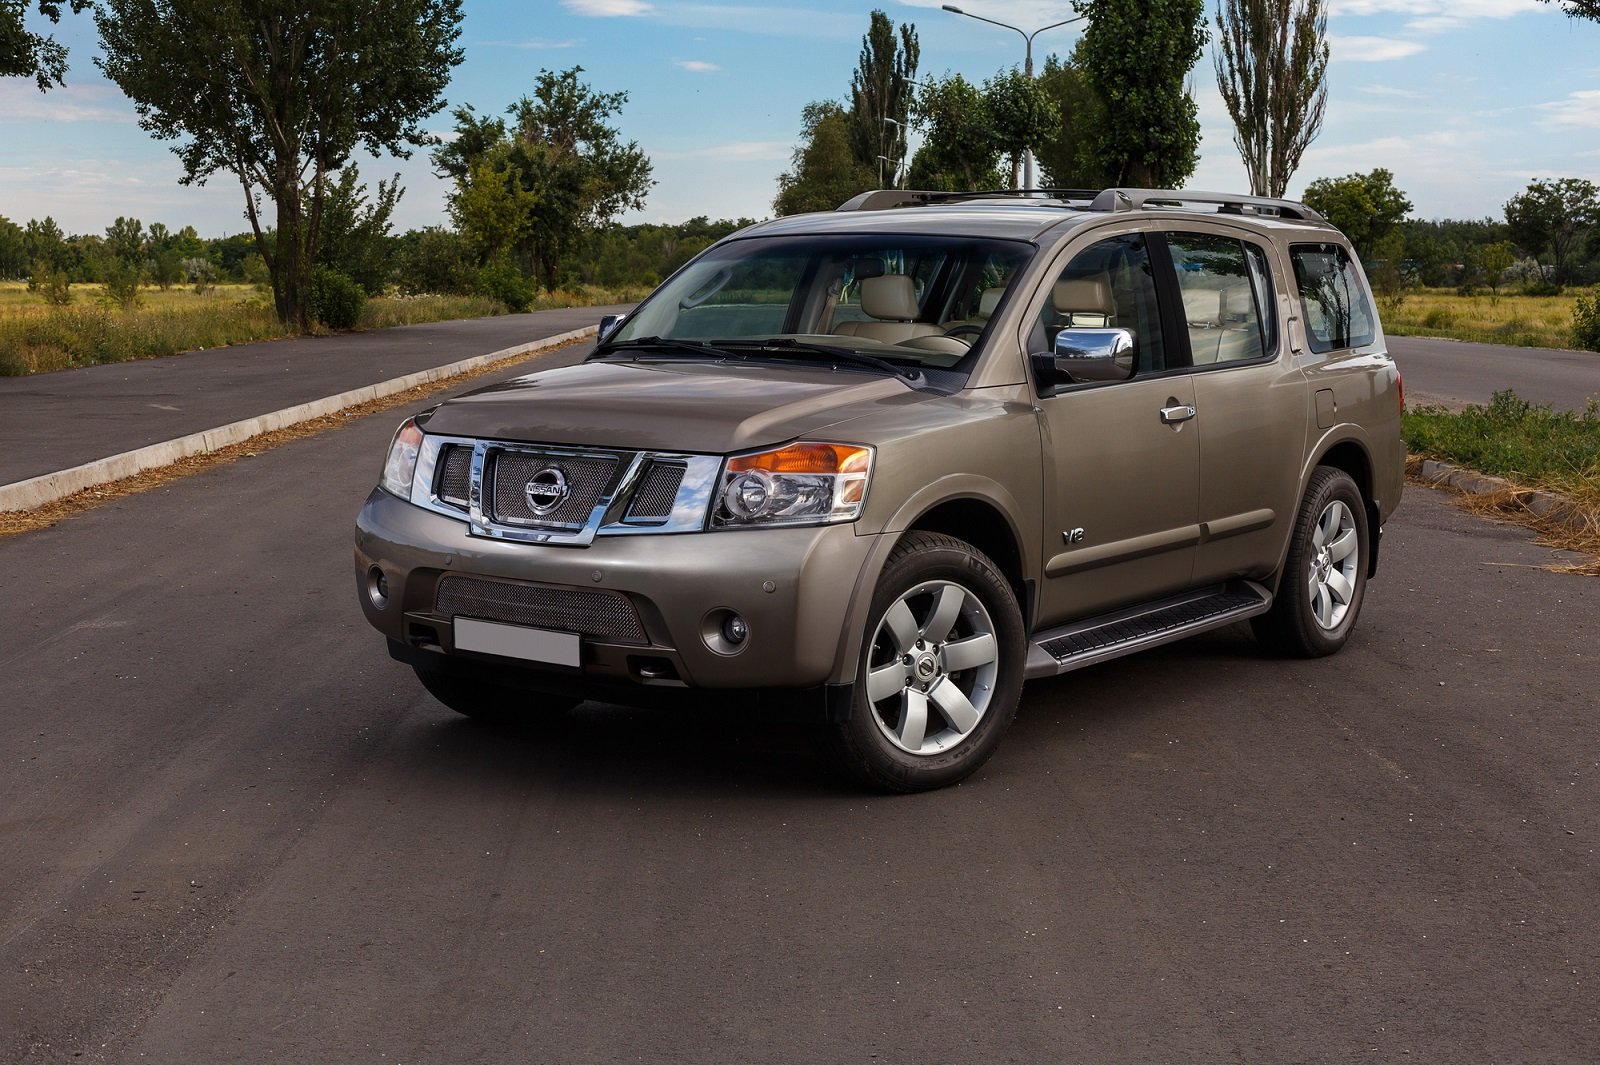 <p>The Nissan Armada is a full-size SUV that has been popular in the past, but there are a few reasons you might want to hesitate before purchasing one in 2024.</p><ul> <li><strong>Fuel Efficiency</strong>: With the growing importance of environmental sustainability, the fuel consumption of the Armada may be a concern. As a large SUV, it’s not known for its fuel efficiency, which could lead to higher long-term costs and a larger carbon footprint.</li> <li><strong>Size</strong>: The Armada is a very large vehicle, which may not be suitable for everyone. Drivers who mainly commute in urban areas or have smaller garages could struggle with parking and manoeuvring.</li> <li><strong>Shift to Electric Vehicles</strong>: The global trend towards electric vehicles is expected to continue, and by 2024, many consumers may prefer to invest in an electric or hybrid vehicle. It might not be ideal to buy a traditional, gas-powered SUV like the Armada.</li> <li><strong>Long-term Resale Value</strong>: With the ever-changing automotive landscape, purchasing a large, gas-powered vehicle like the Nissan Armada could affect its resale value in the future. As more people shift towards eco-friendly vehicles, demand for traditional SUVs may decrease.</li> </ul><p><strong>RELATED</strong>:  <a href="https://www.miramarspeedcircuit.com/40-modern-cars-last-longer-300k/">40 Modern Cars That Last Longer Than 300k Miles and Beyond</a>!</p>